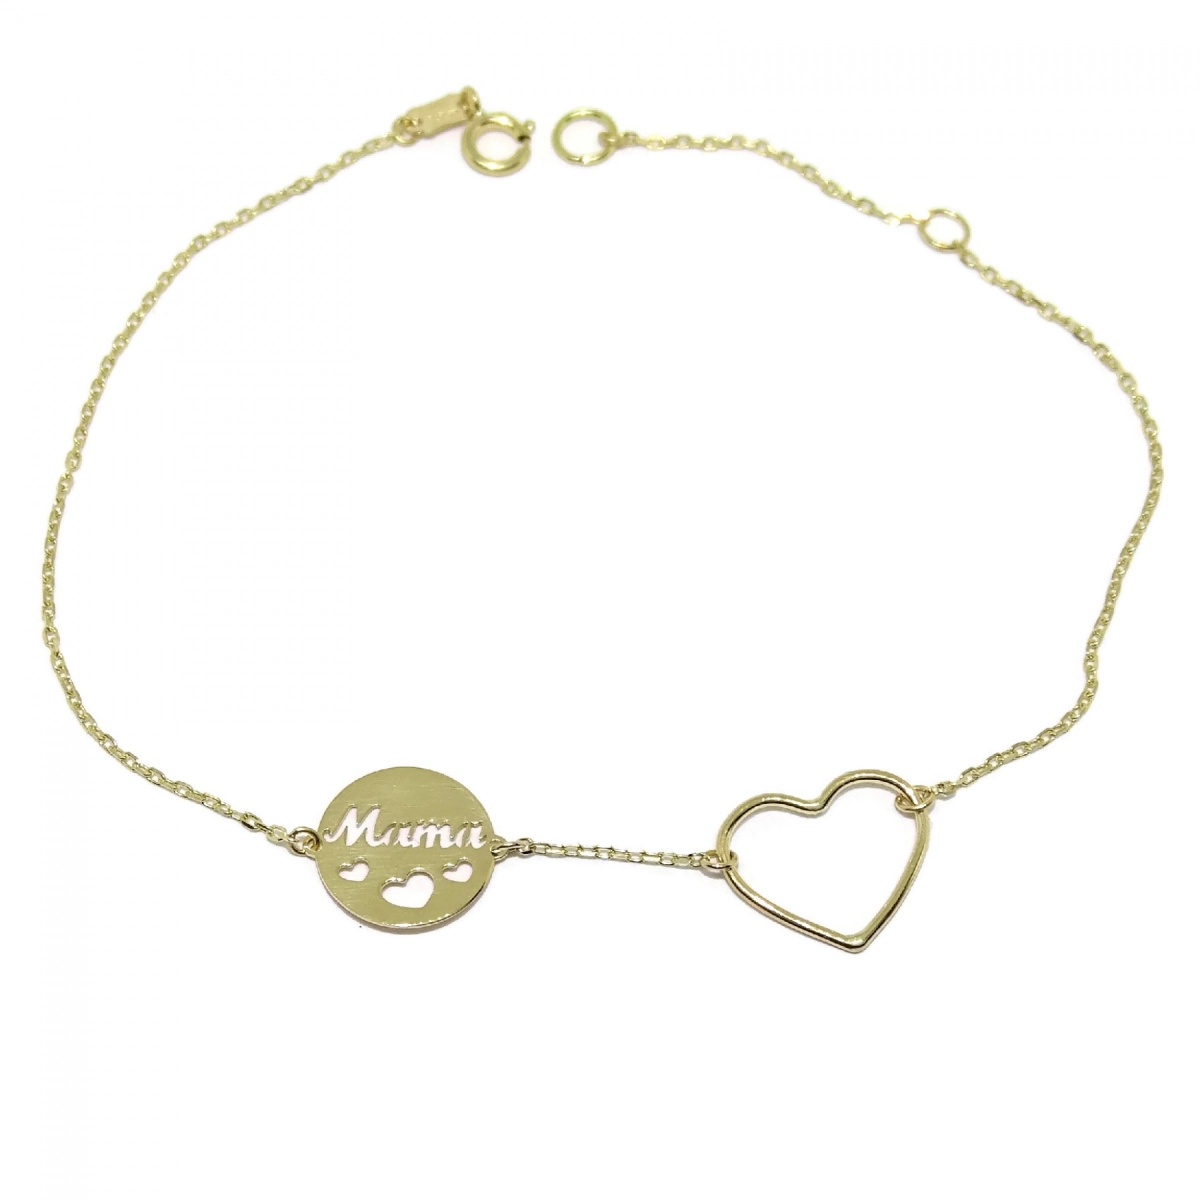 BRACELET OF YELLOW GOLD OF 18K WITH REASON, HEART, AND CIRCLE MOM. 18.5 CM NEVER SAY NEVER